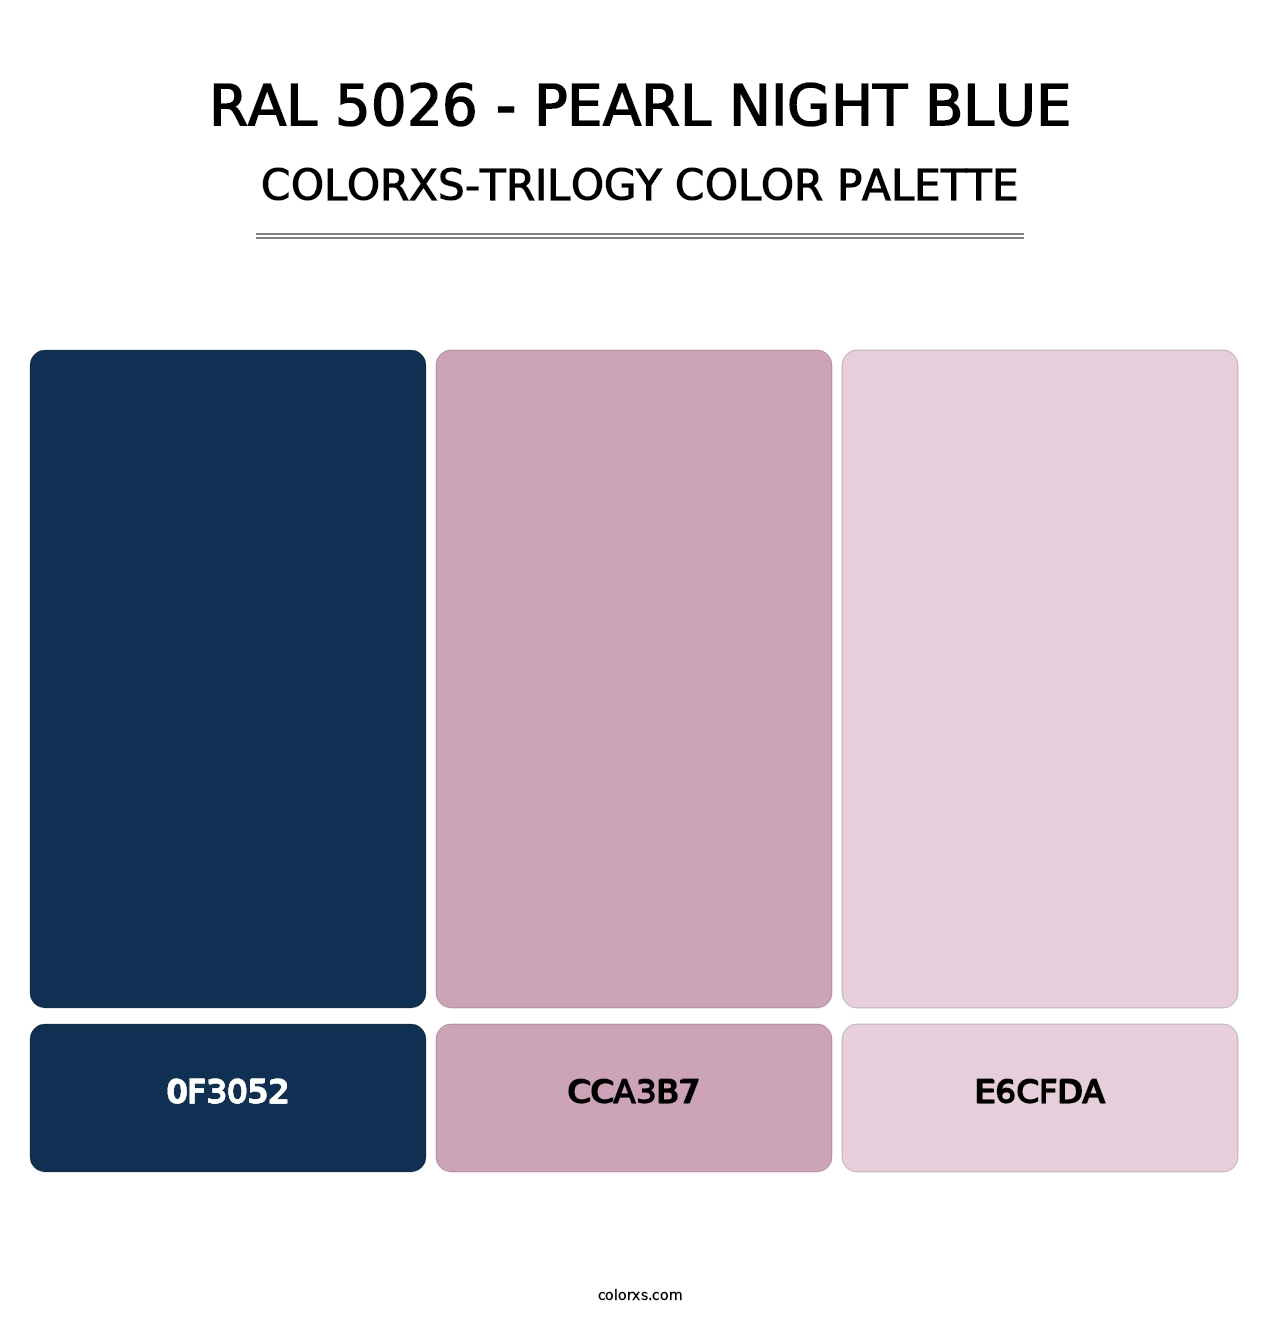 RAL 5026 - Pearl Night Blue - Colorxs Trilogy Palette